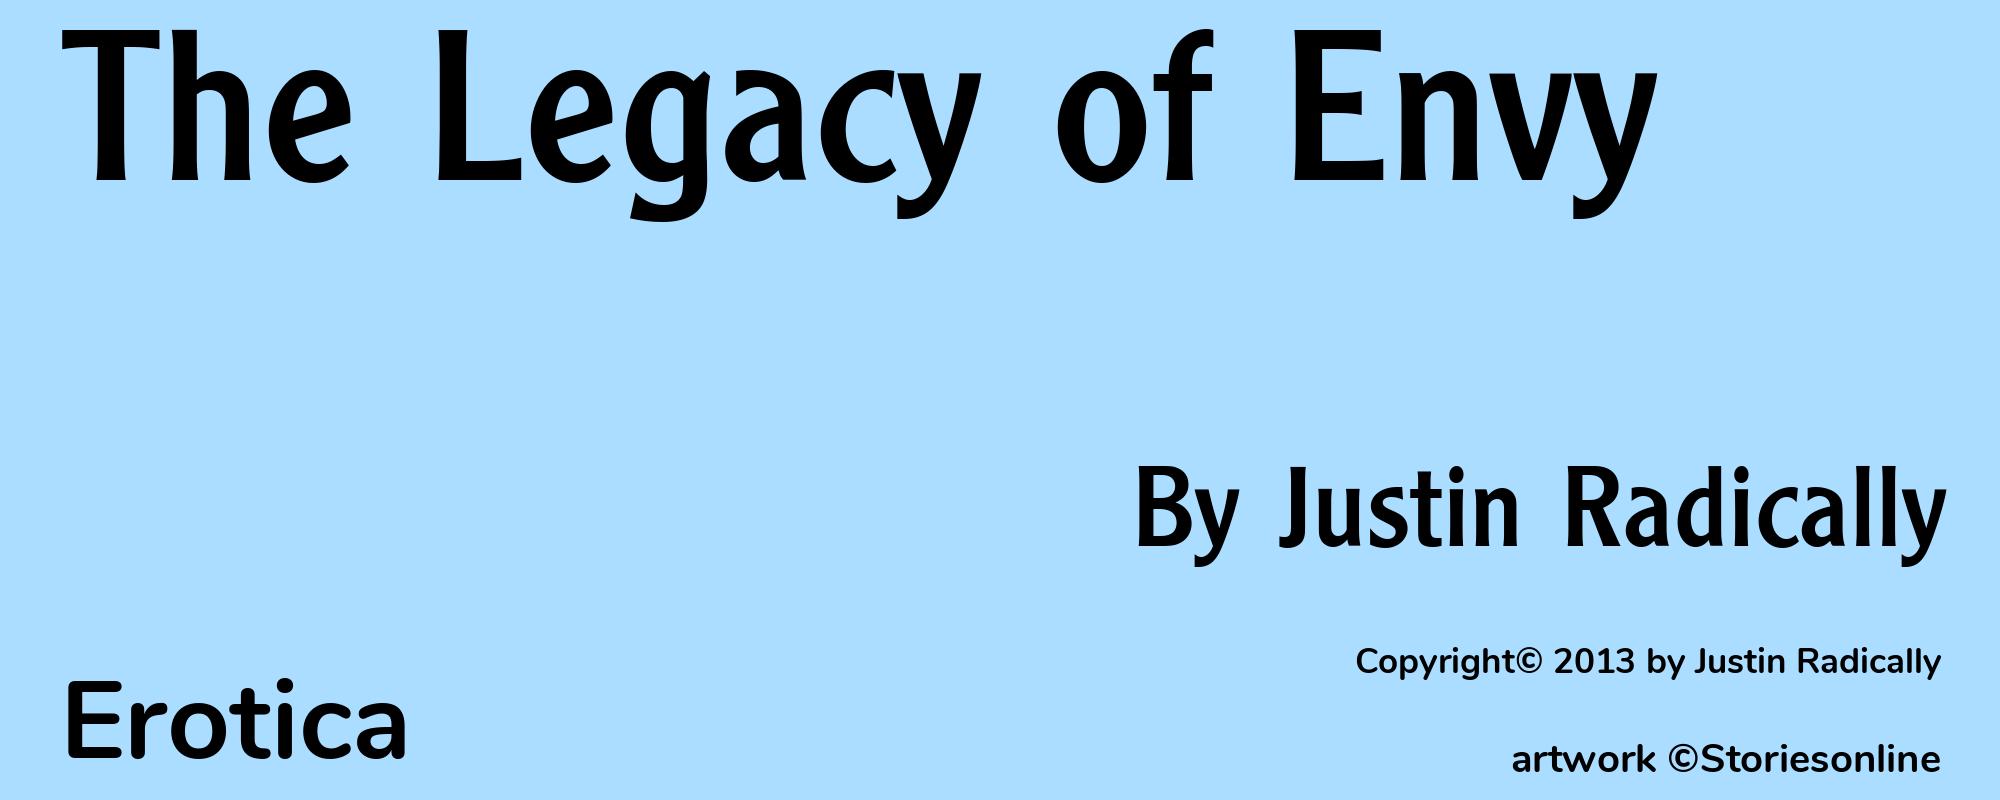 The Legacy of Envy - Cover